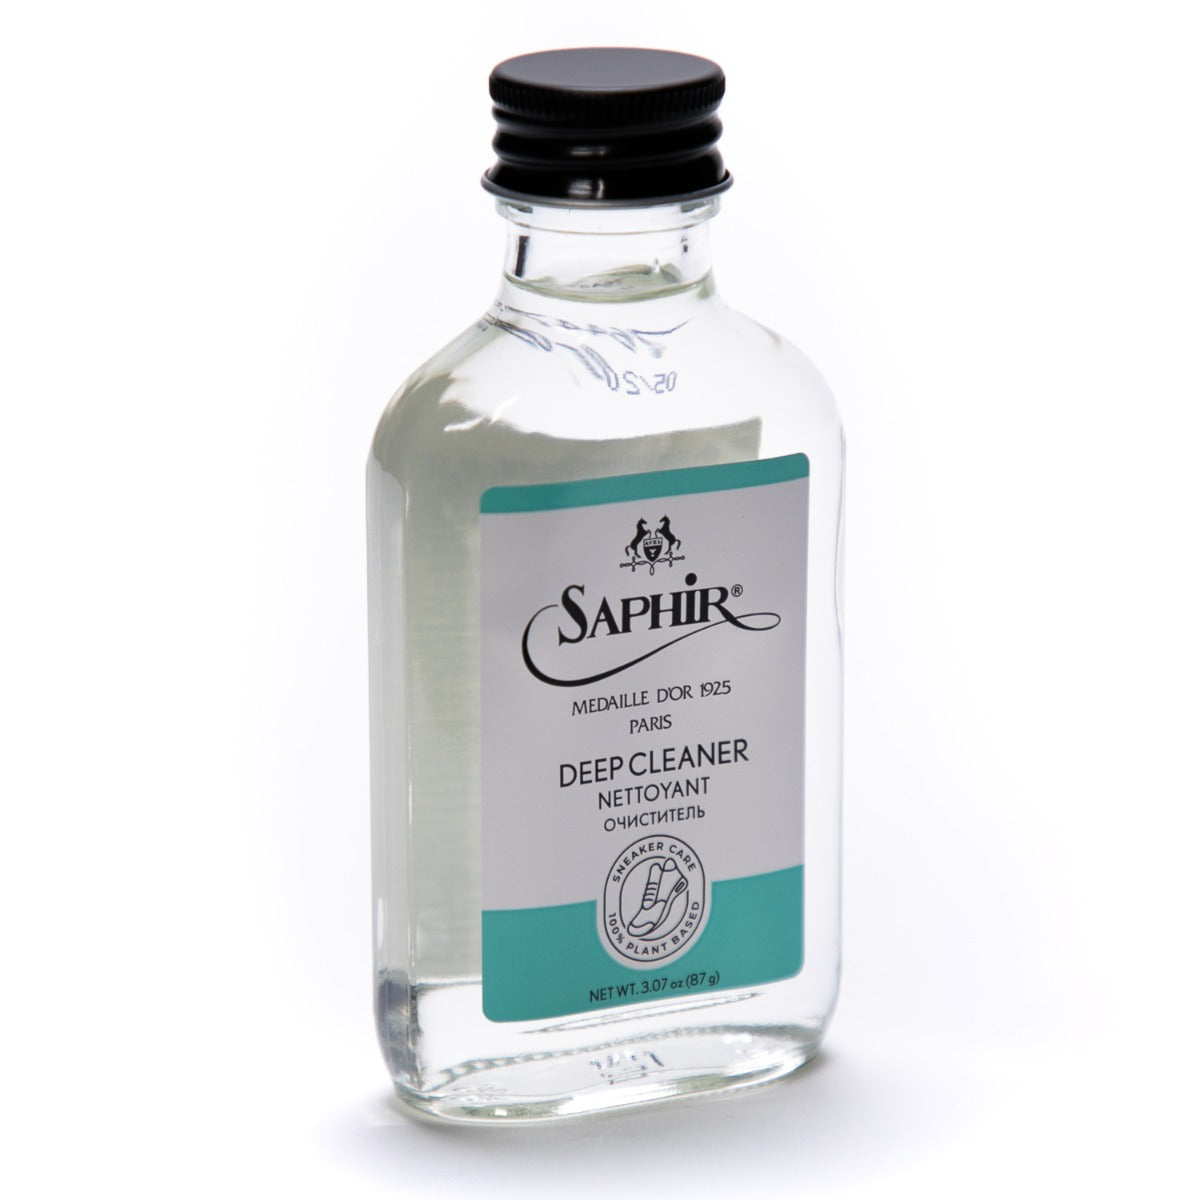 A bottle of Saphir Sneaker Deep Cleaner - 100ml from KirbyAllison.com on a white background.